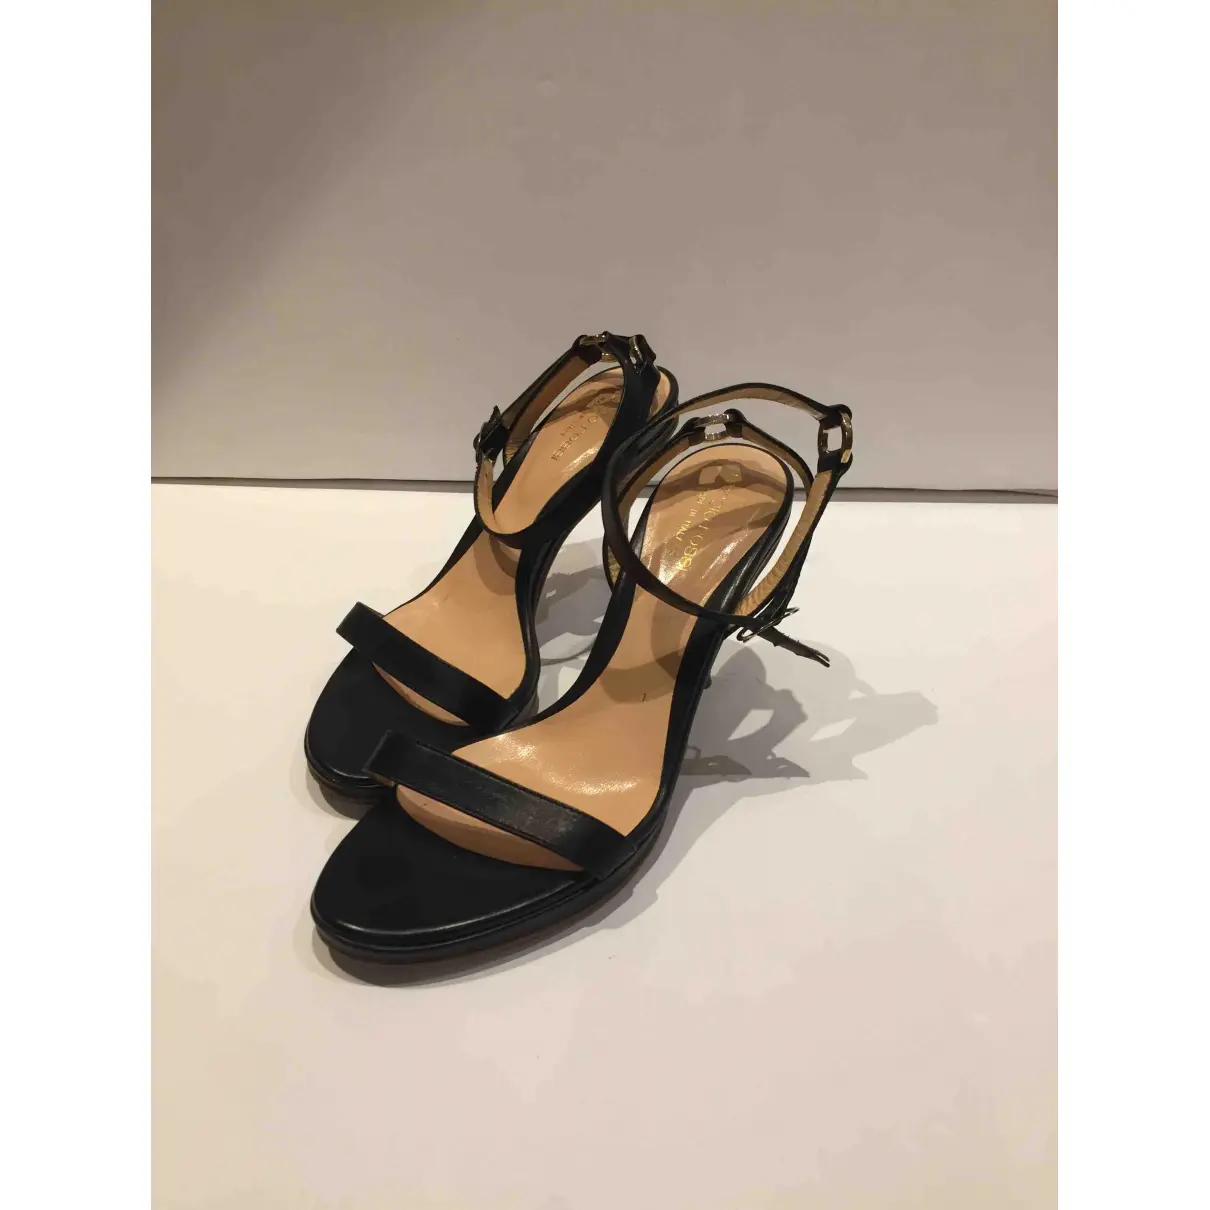 Buy Sergio Rossi Leather sandal online